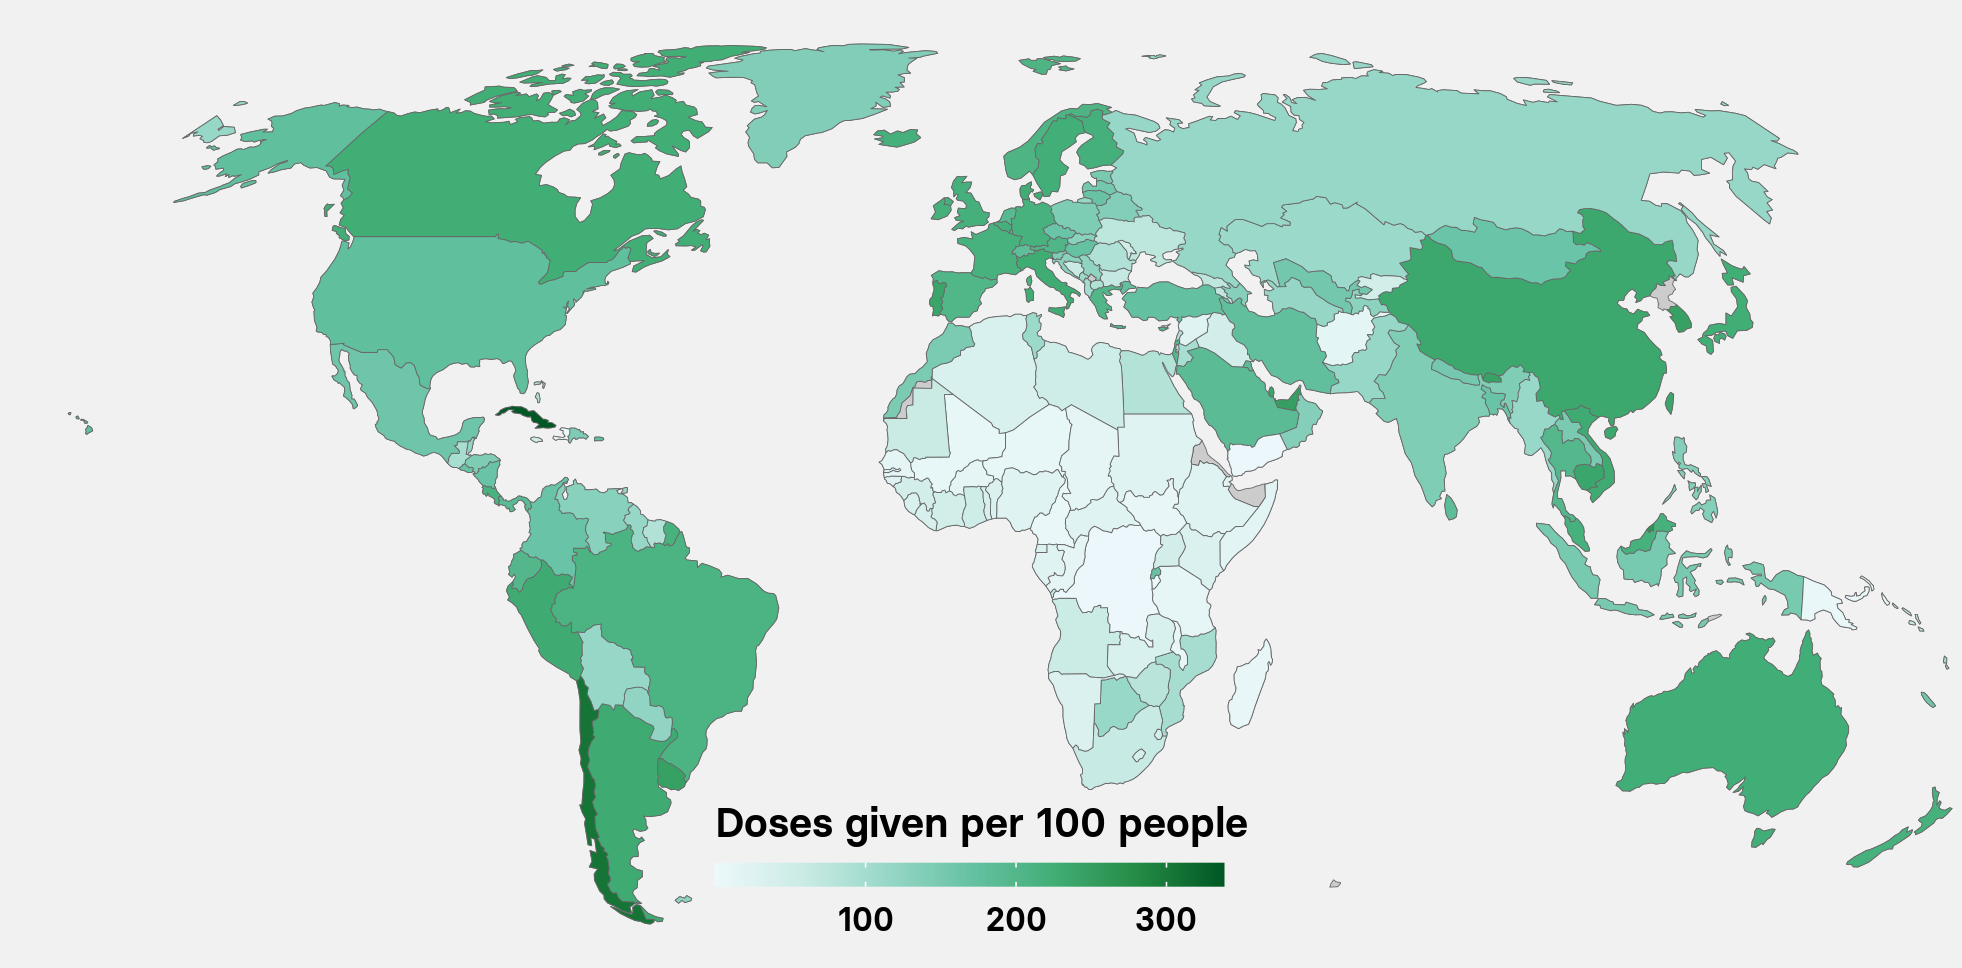 Vaccination rate per 100 people worldwide